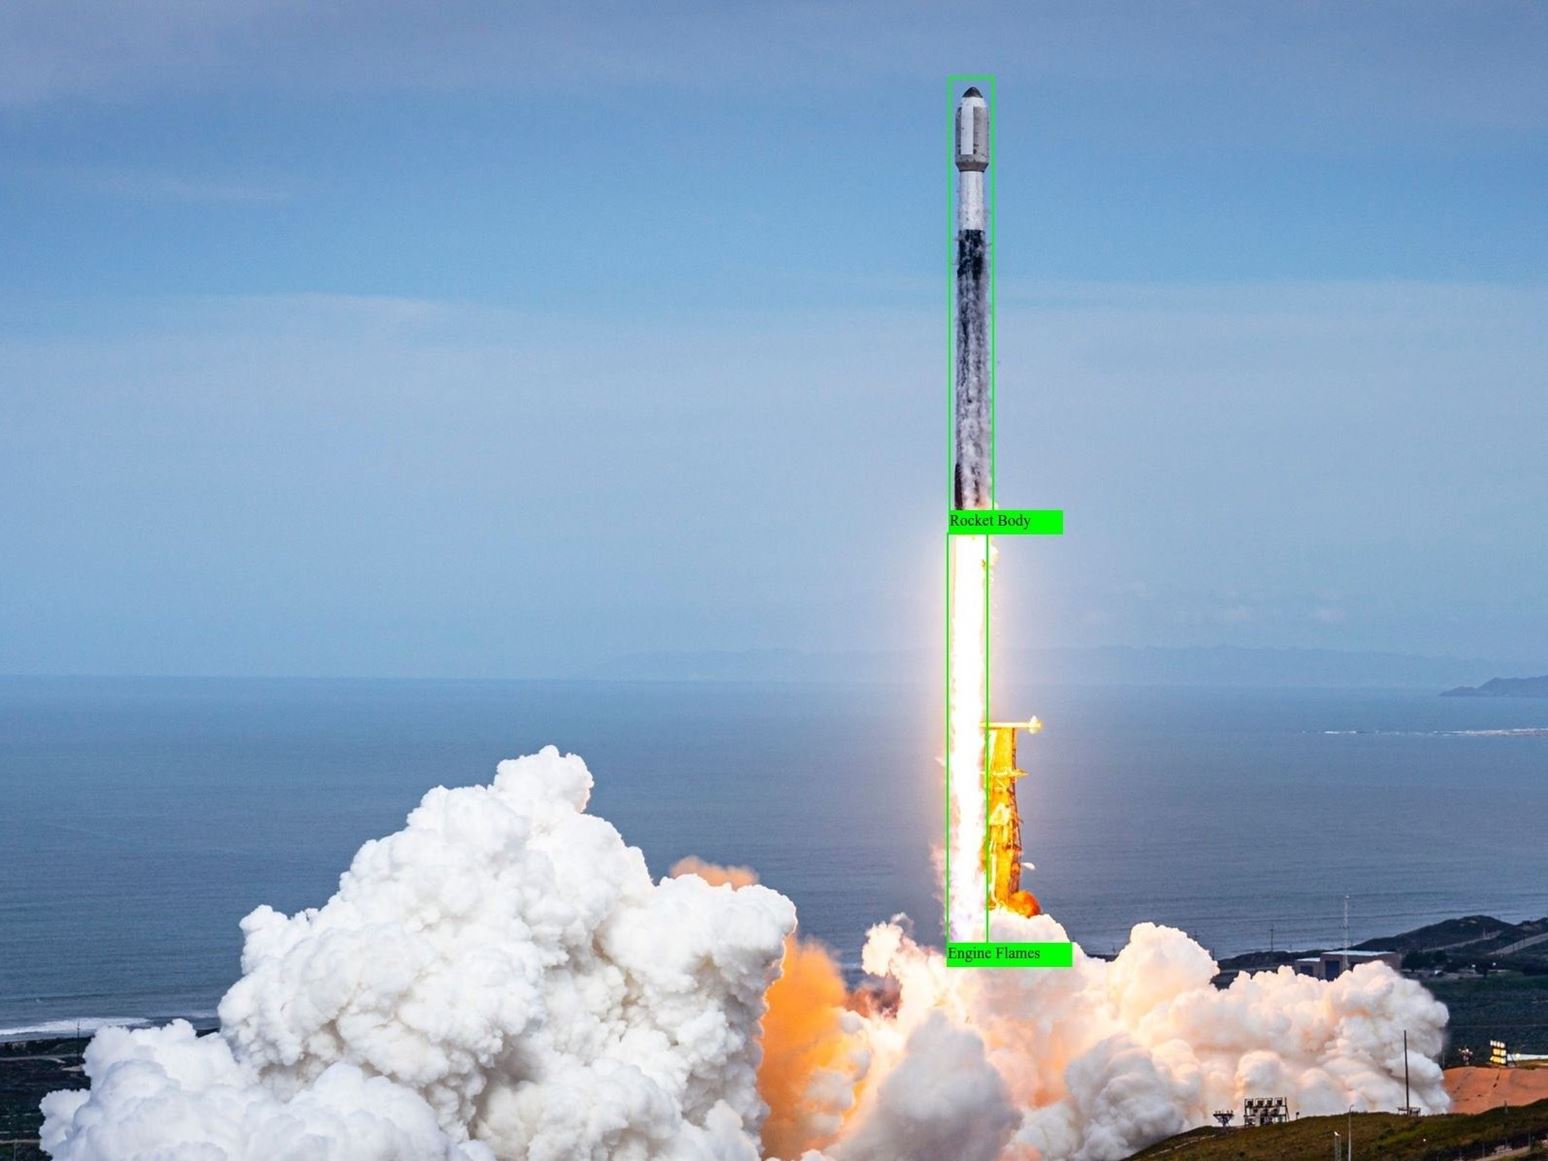 Rocket launch being identified by an artificial intelligence system